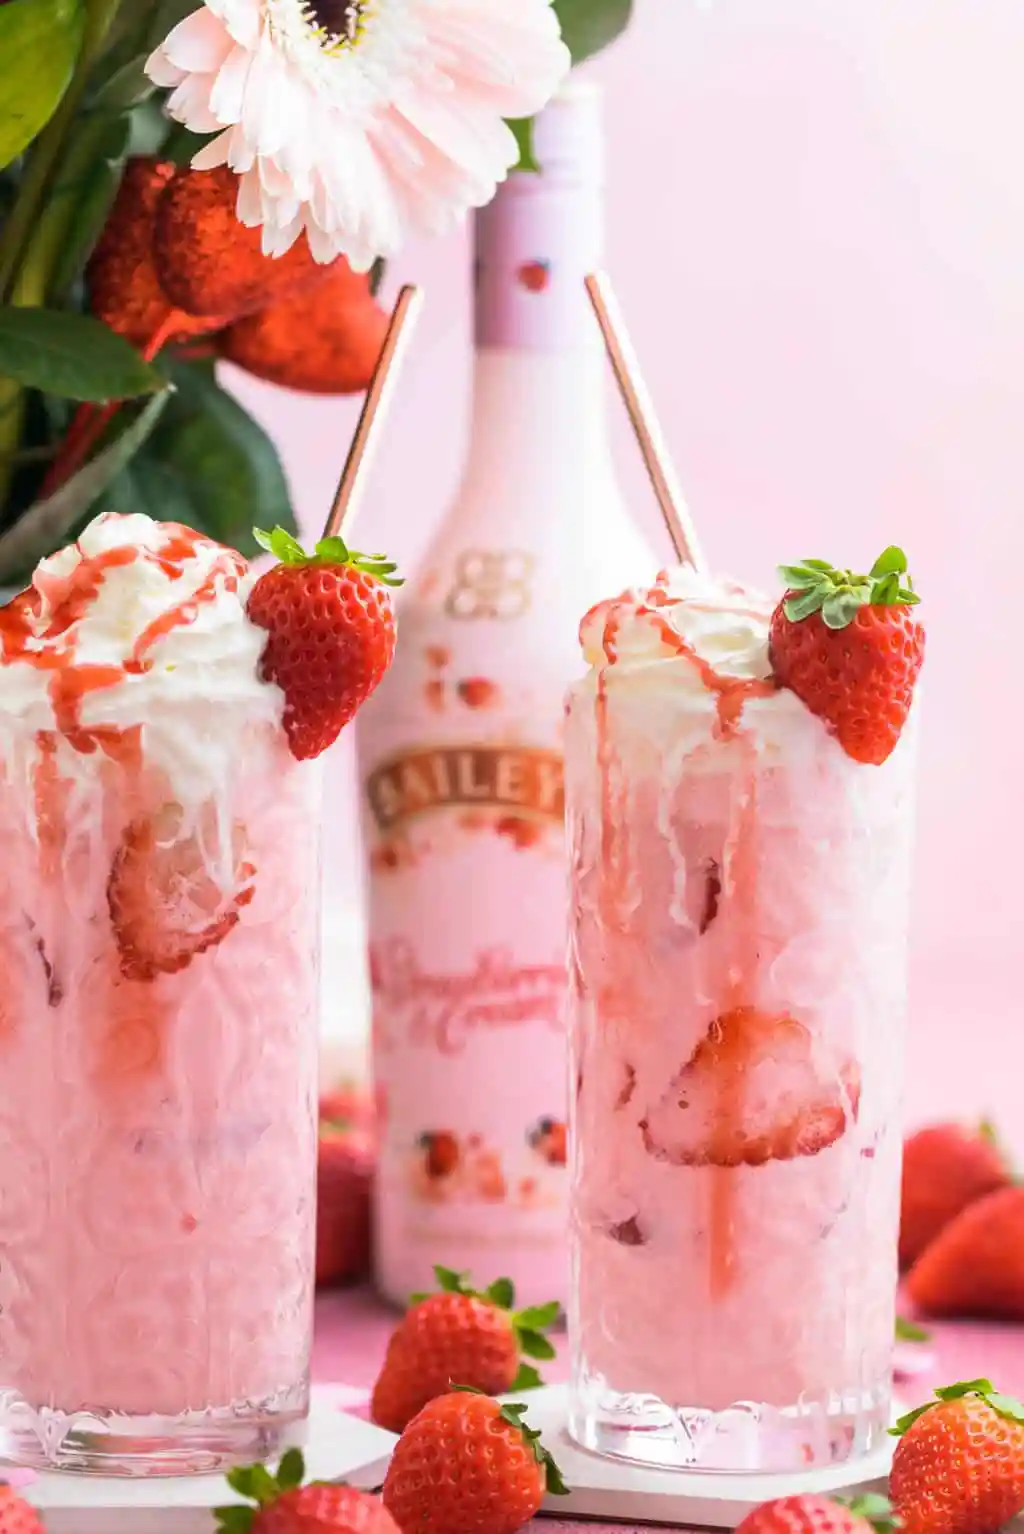 BAILEYS STRAWBERRIES AND CREAM PINK MUDSLIDE RECIPE - Looking for some tasty and colorful cocktail inspiration? Look no further than our round-up of the 10 most delicious pink cocktails! From refreshing fruity blends to classic favorites, there's something for every taste in this list. So why not mix things up and try one of these pretty pink drinks at your next gathering?